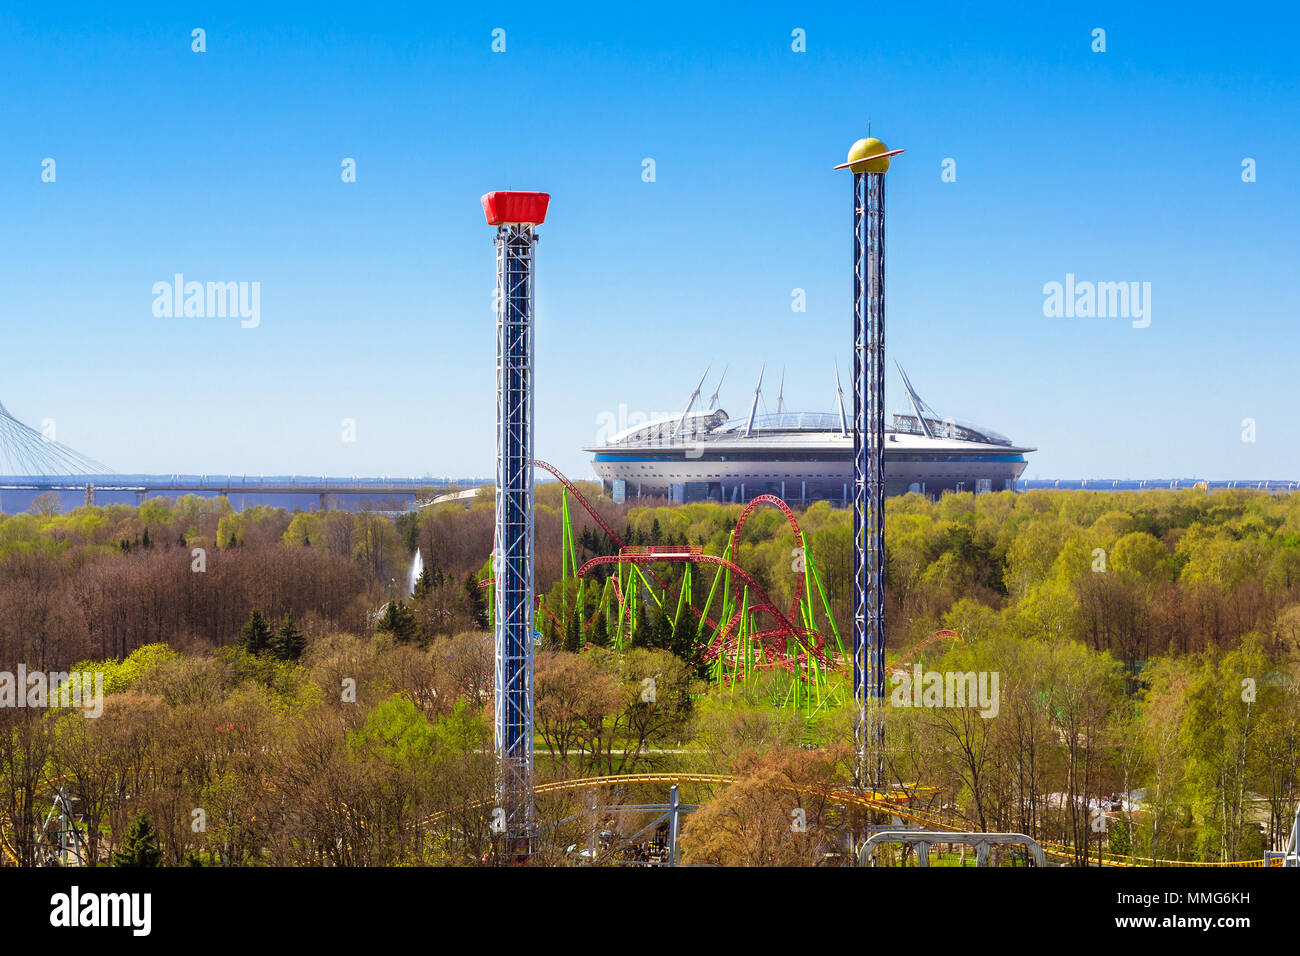 View from height of Ferris wheel to amusement Park, Cable-stayed Bridge and stadium Saint-Petersburg - Zenit Arena football stadium. Seaside Victory P Stock Photo